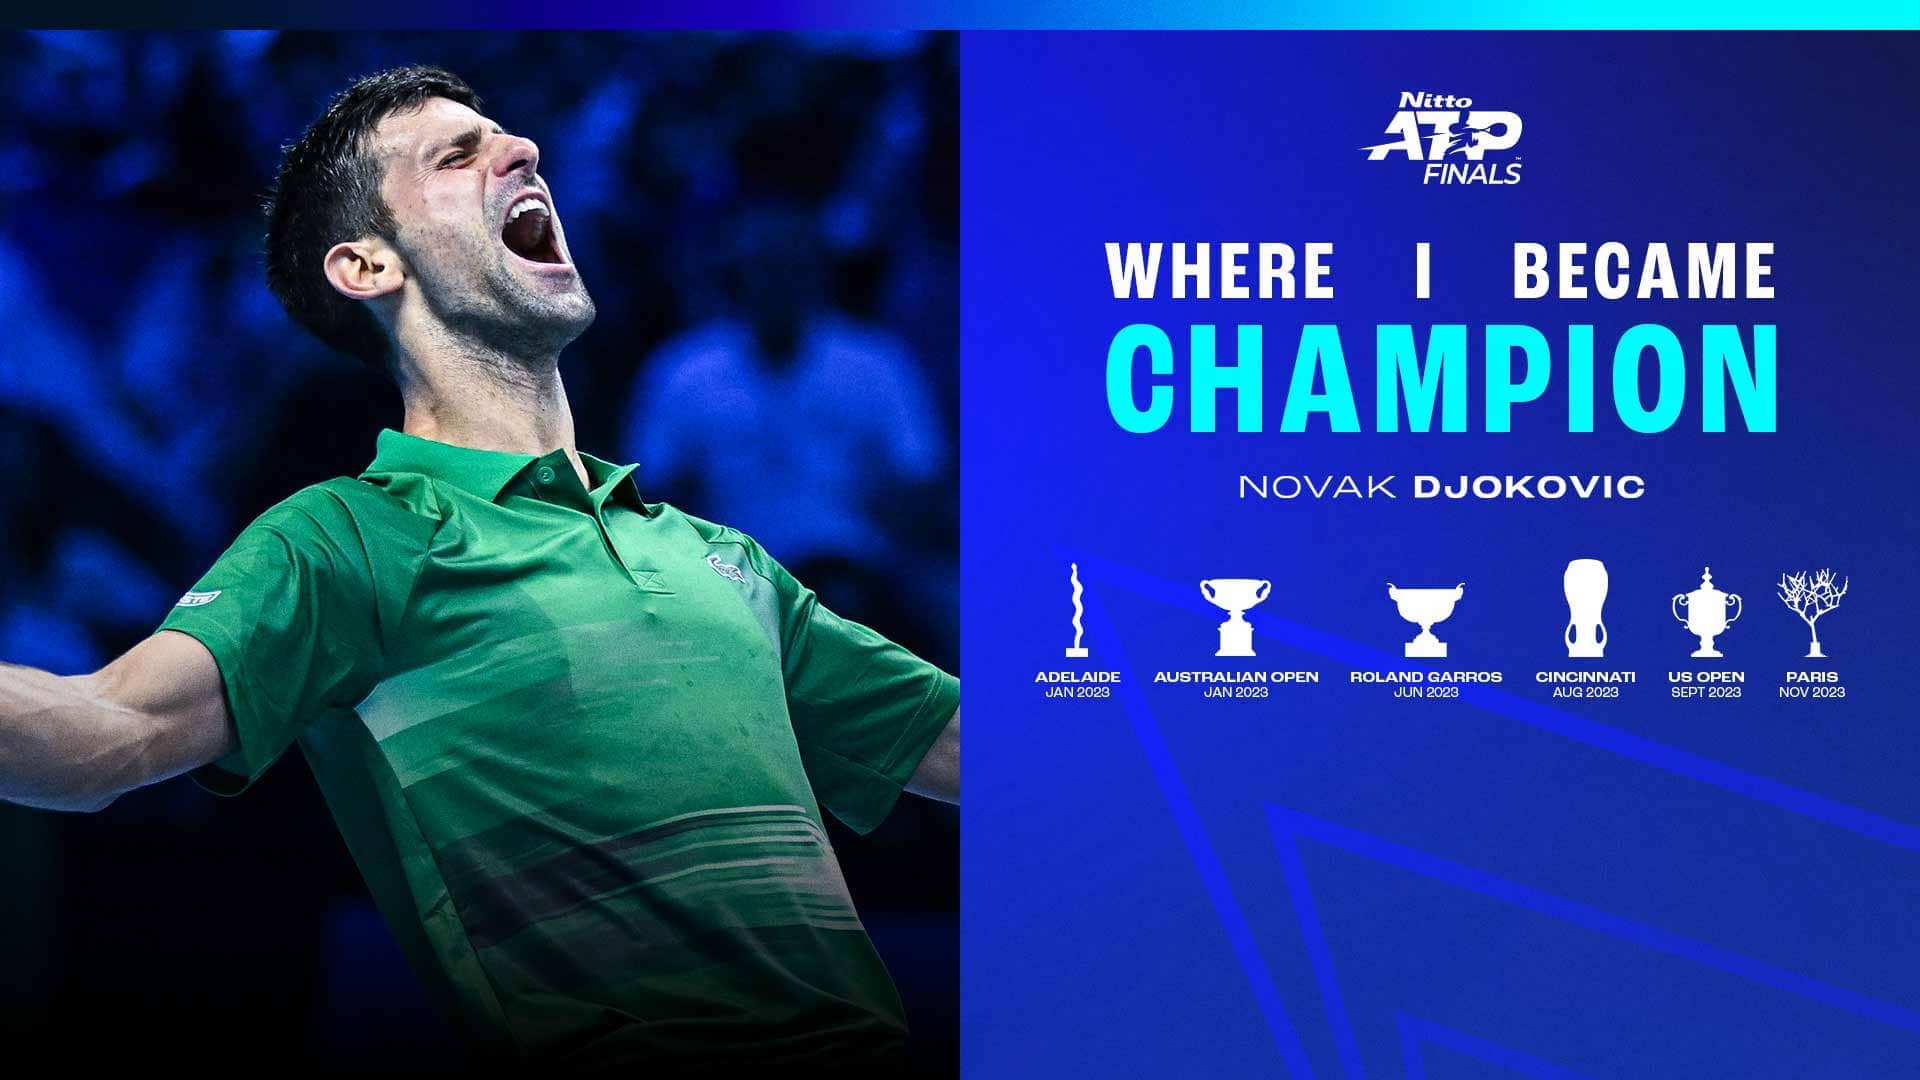 Novak Djokovic has won six tour-level titles this season, level with Carlos Alcaraz for most in 2023.